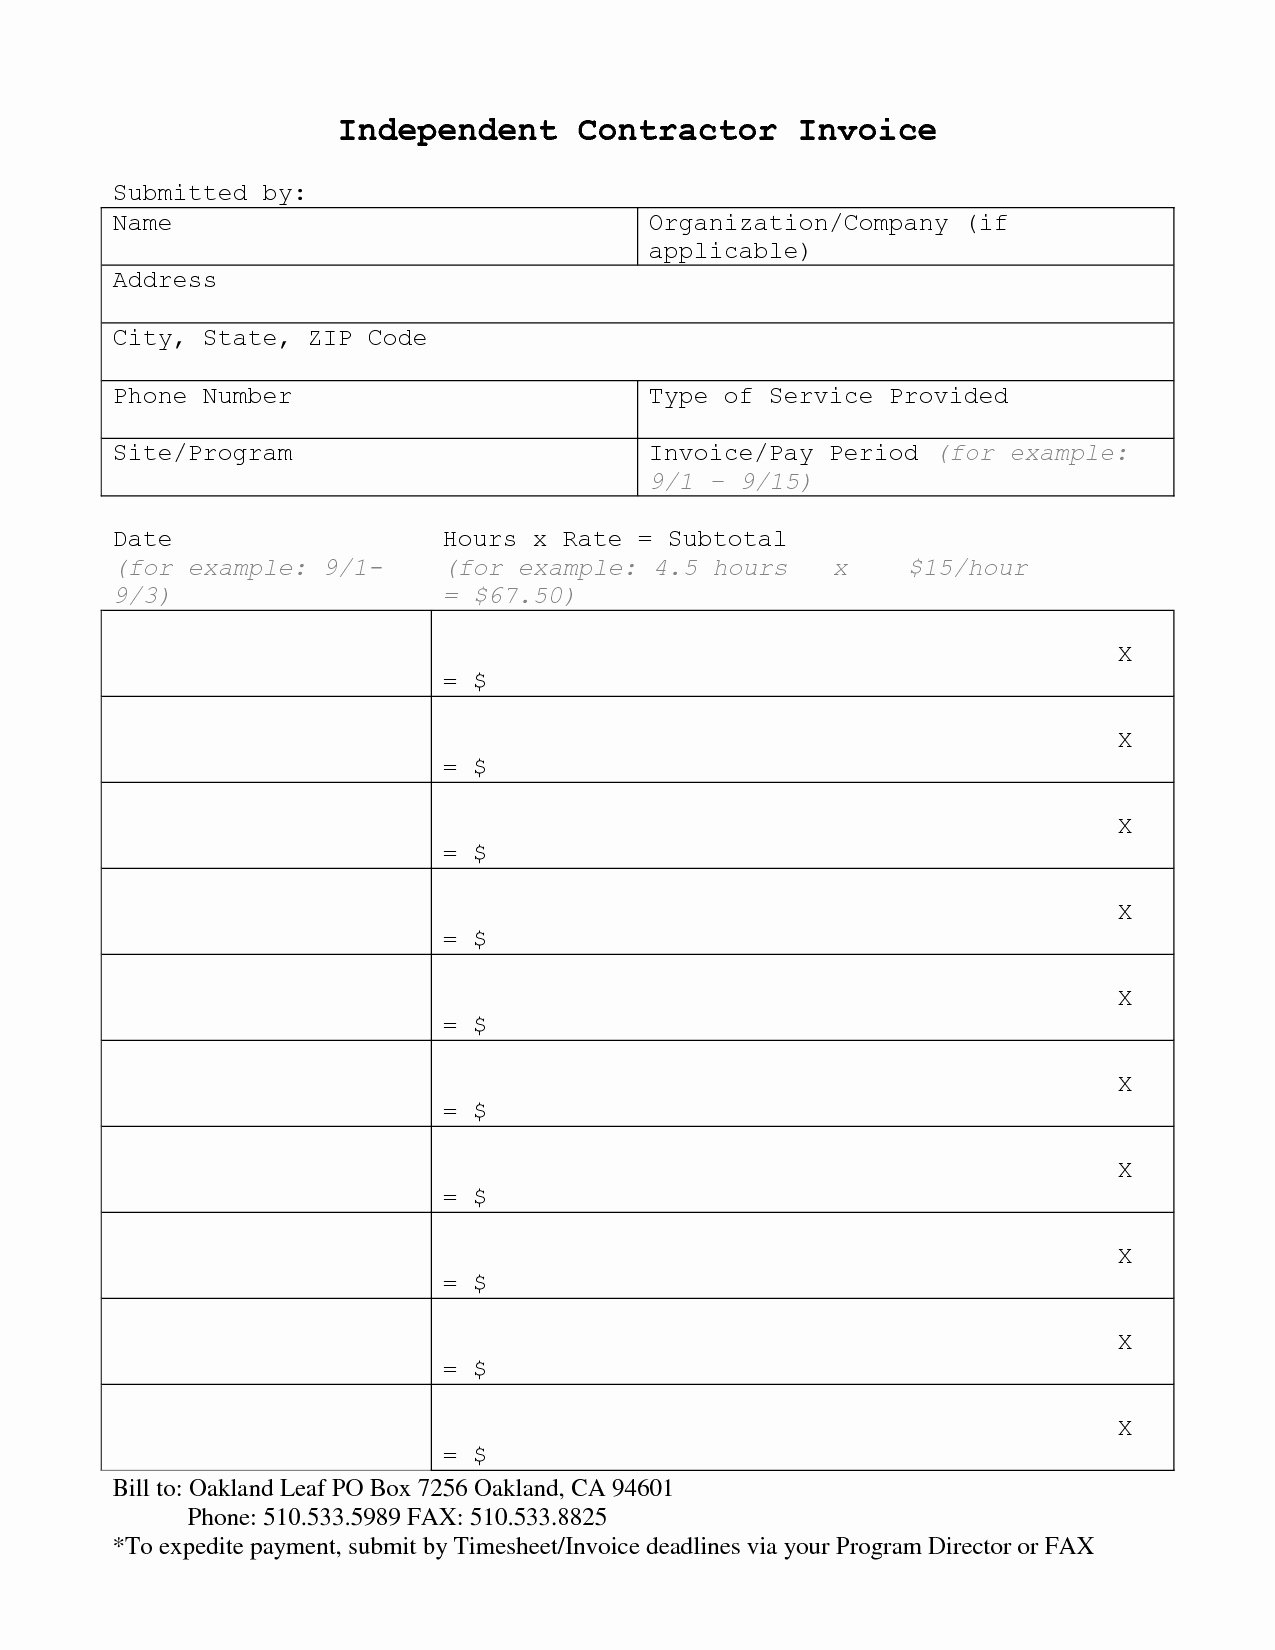 Independent Contractor Invoice Template Pdf Awesome Independent Contractor Invoice Invoice Template Ideas